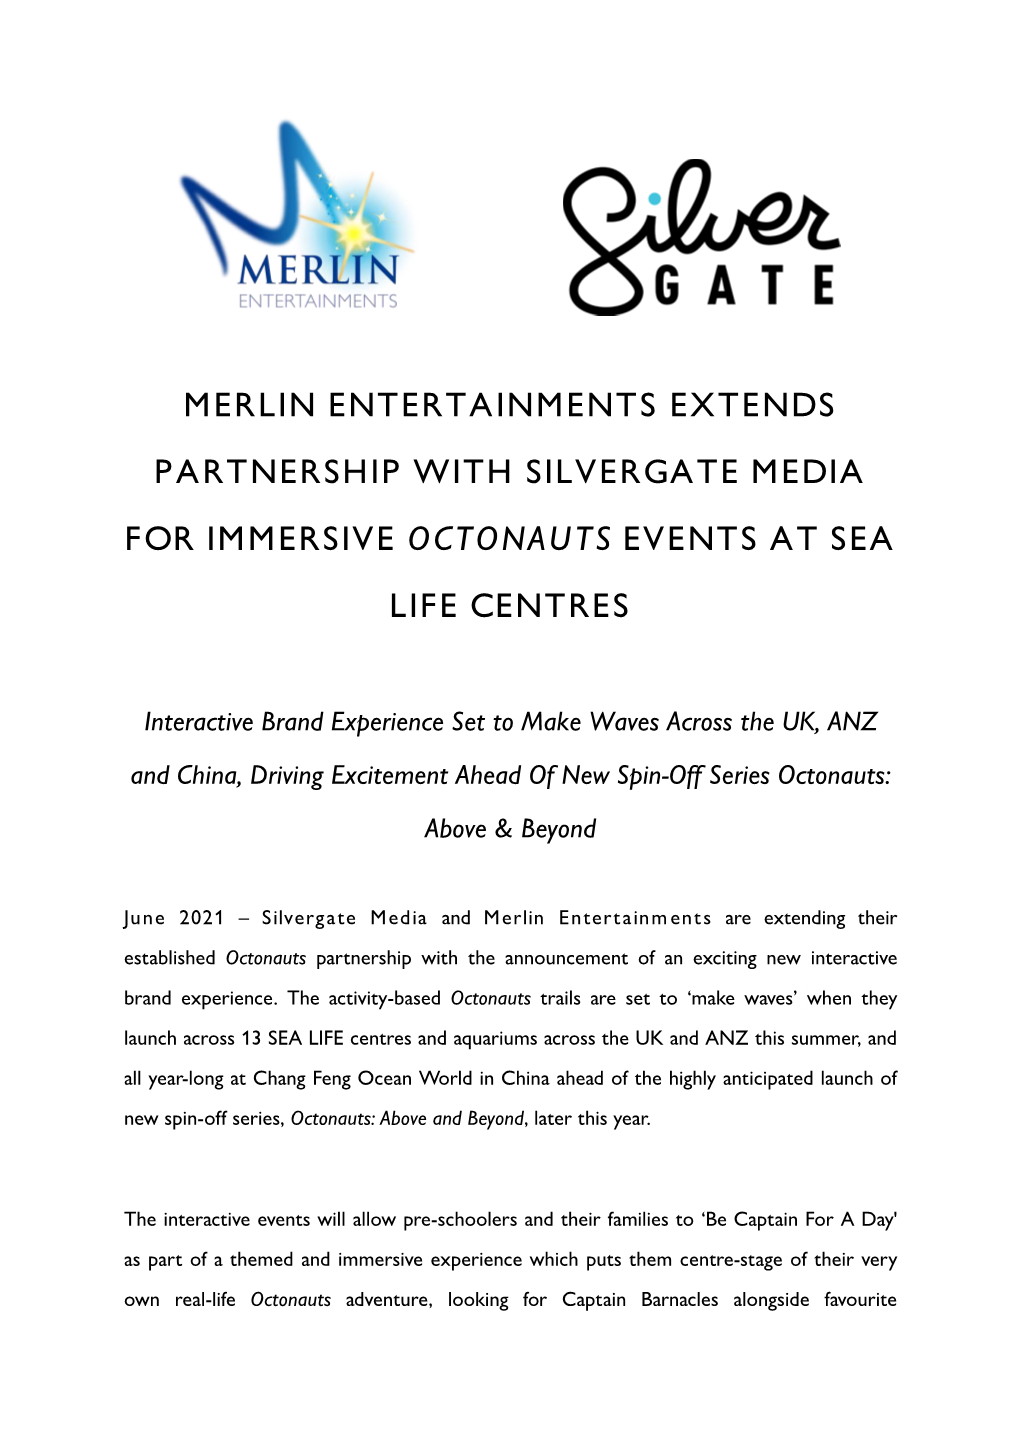 Merlin Entertainments Extends Partnership with Silvergate Media for Immersive Octonauts Events at Sea